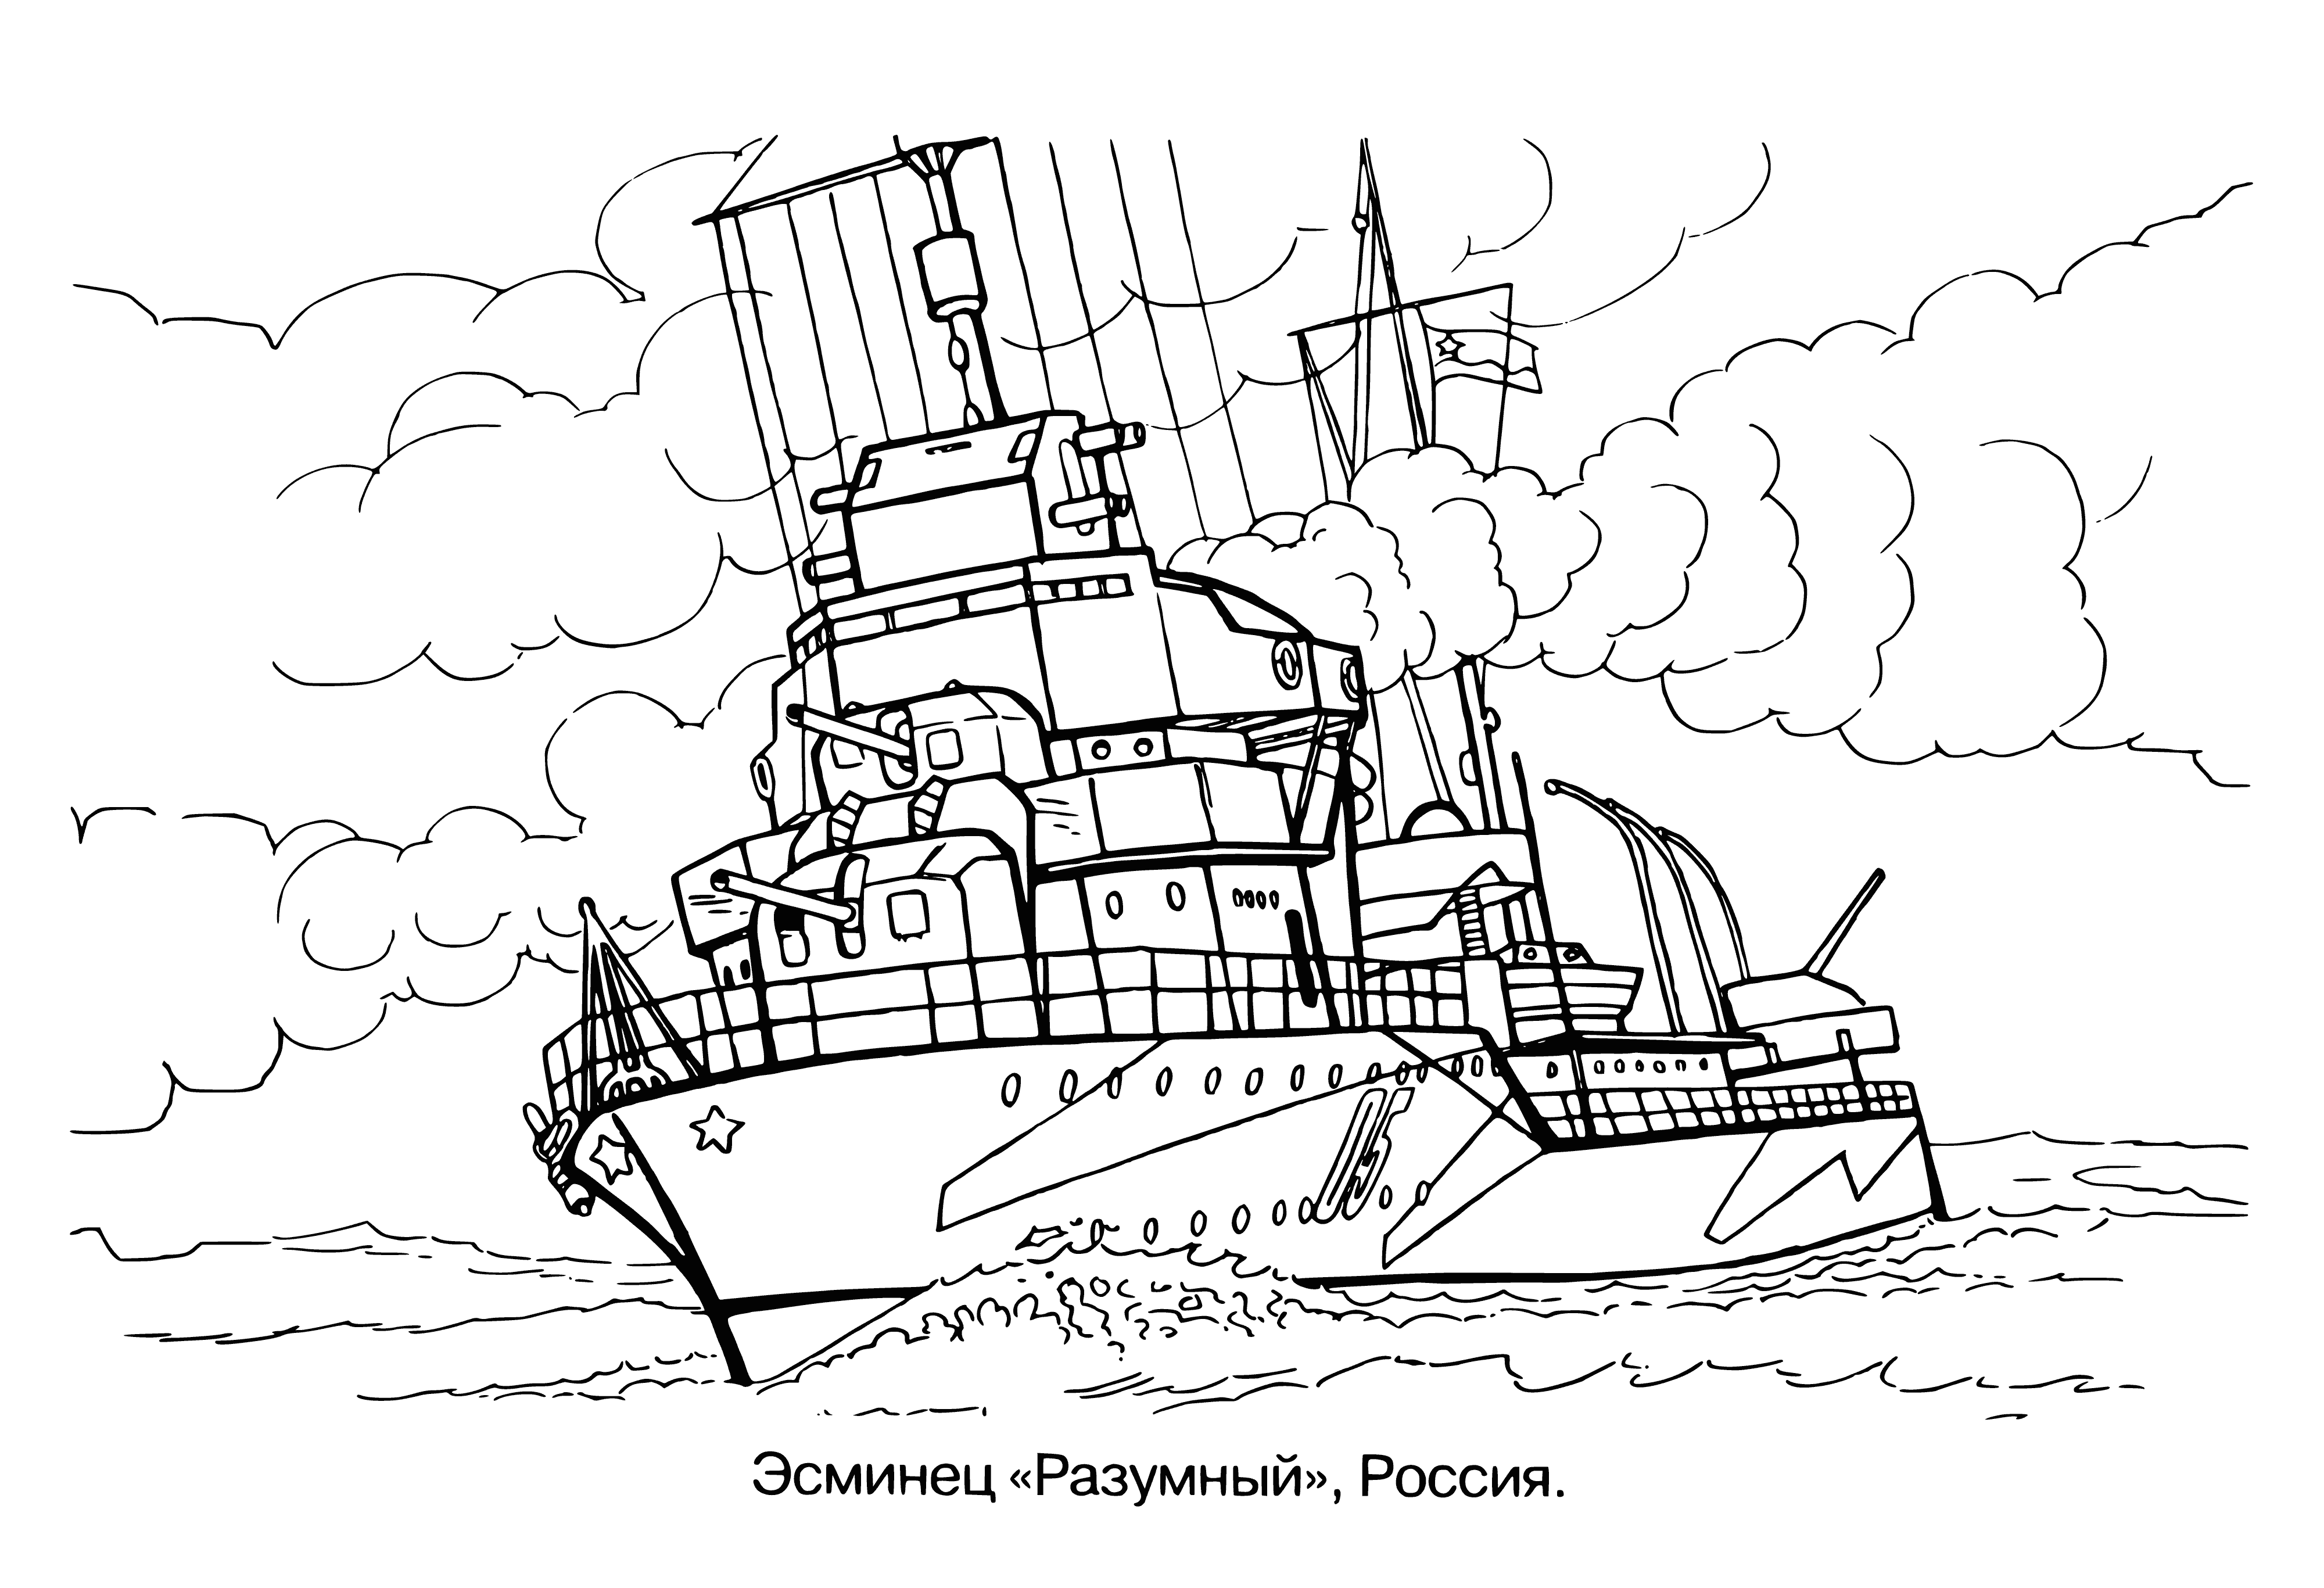 coloring page: A warship called a destroyer is used to protect against enemy ships and aircraft. Fast and well-armed, they sail the ocean.